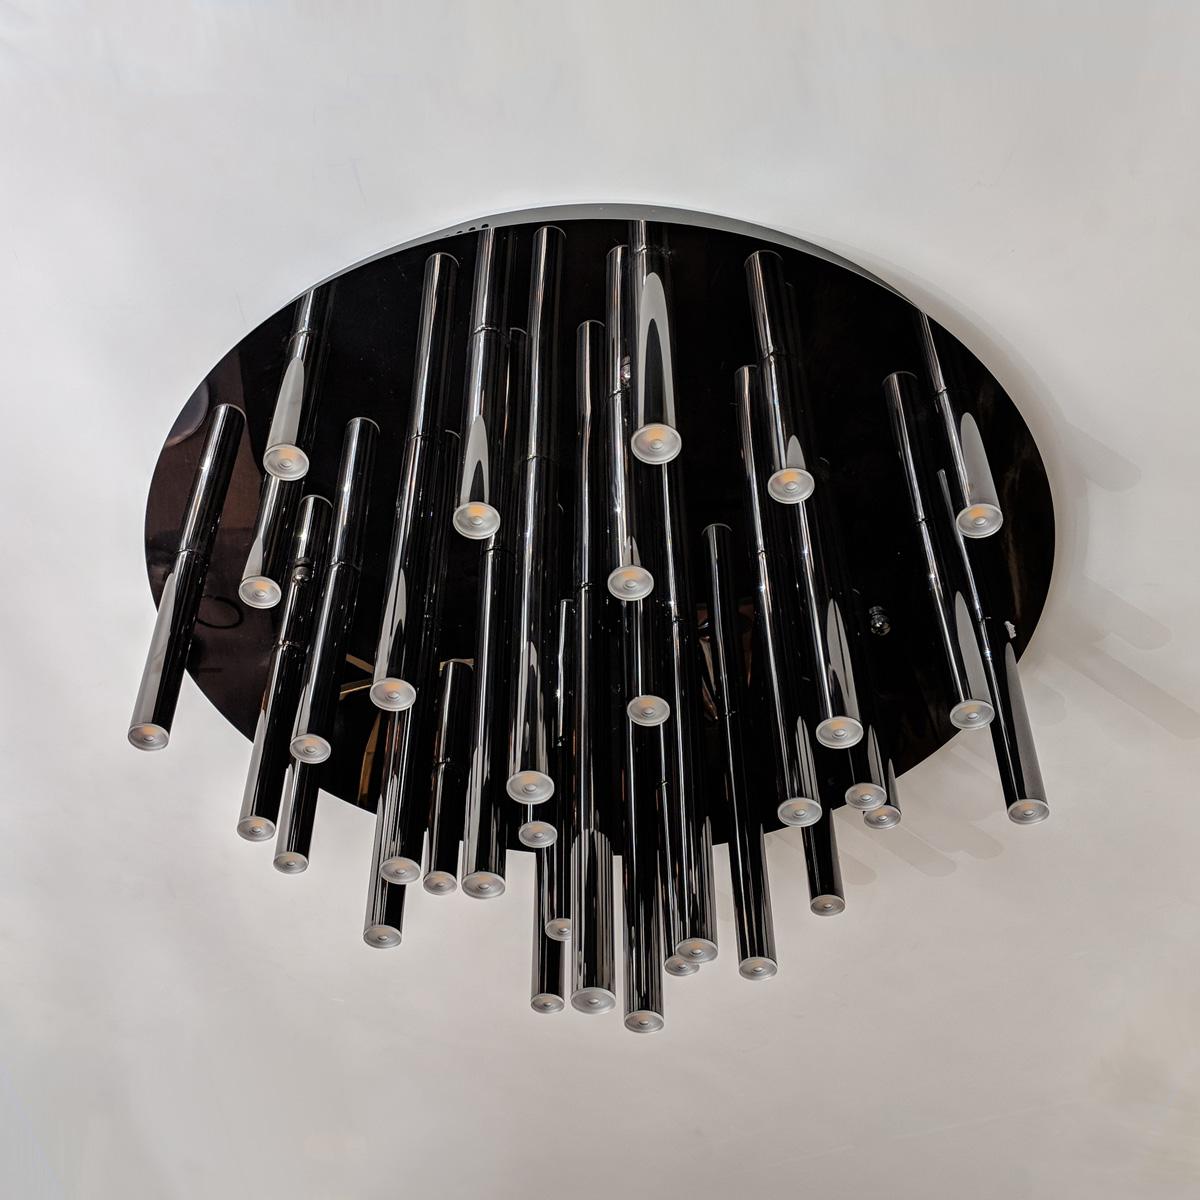 Tube LED lights grouped on a round ceiling plate.
Available in 3 standard sizes.
Can be customized to your specifications.

Dimensions: 
NO/CL/DRAPE/RD24: 24? dia. x 13?H / 33 x 1W LED Shown in polished black nickel finish
NO/CL/DRAPE/RD31: